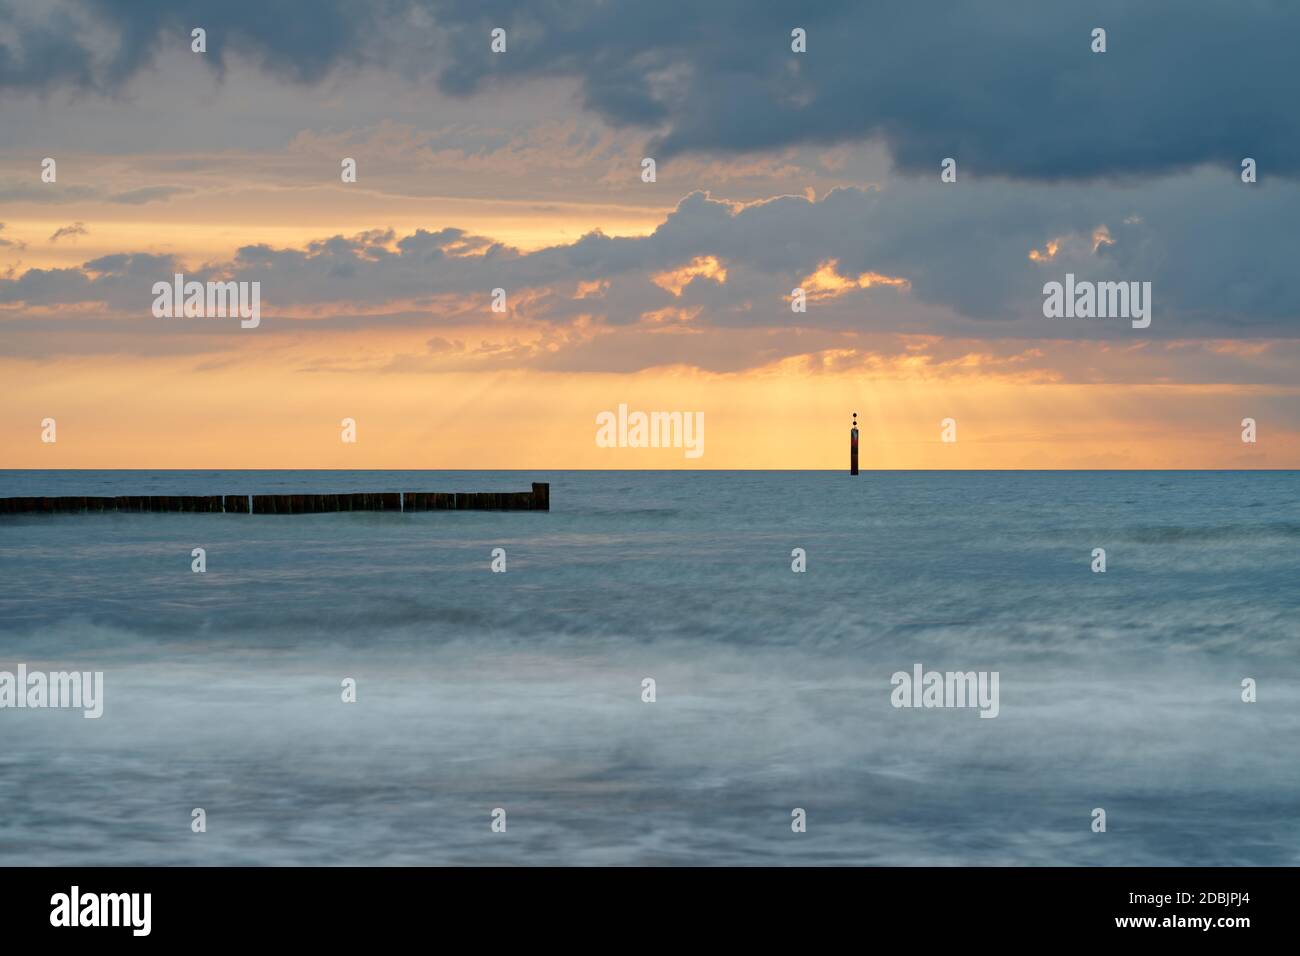 Quiet beach shot from the Baltic Sea coast to the sunset with a distinctive wave structure, a row of groynes and a signal mast in the background, the Stock Photo